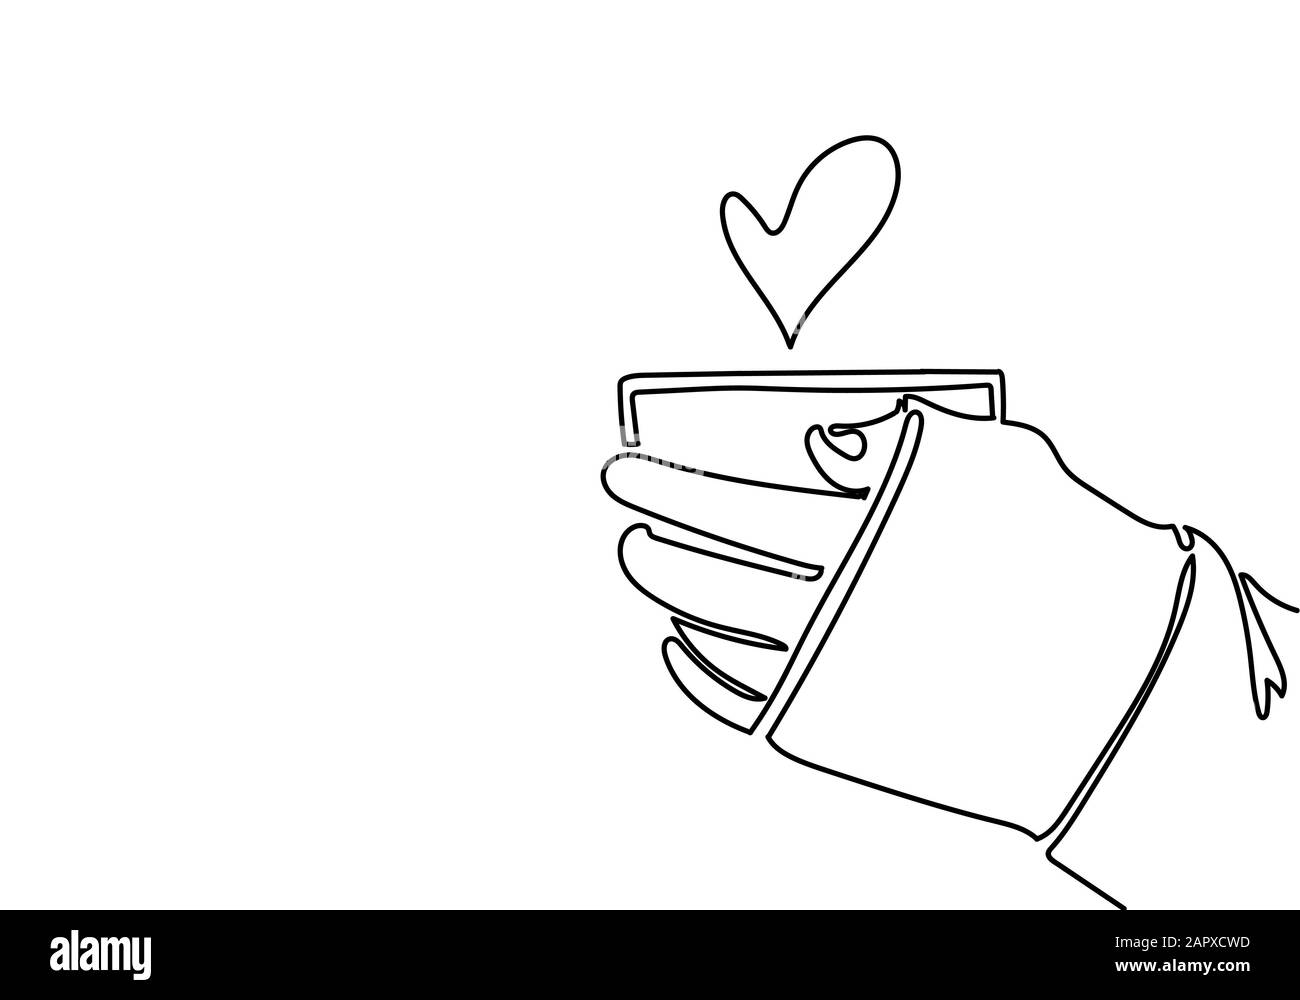 One continuous line drawing of hands holding coffee. Stock Photo